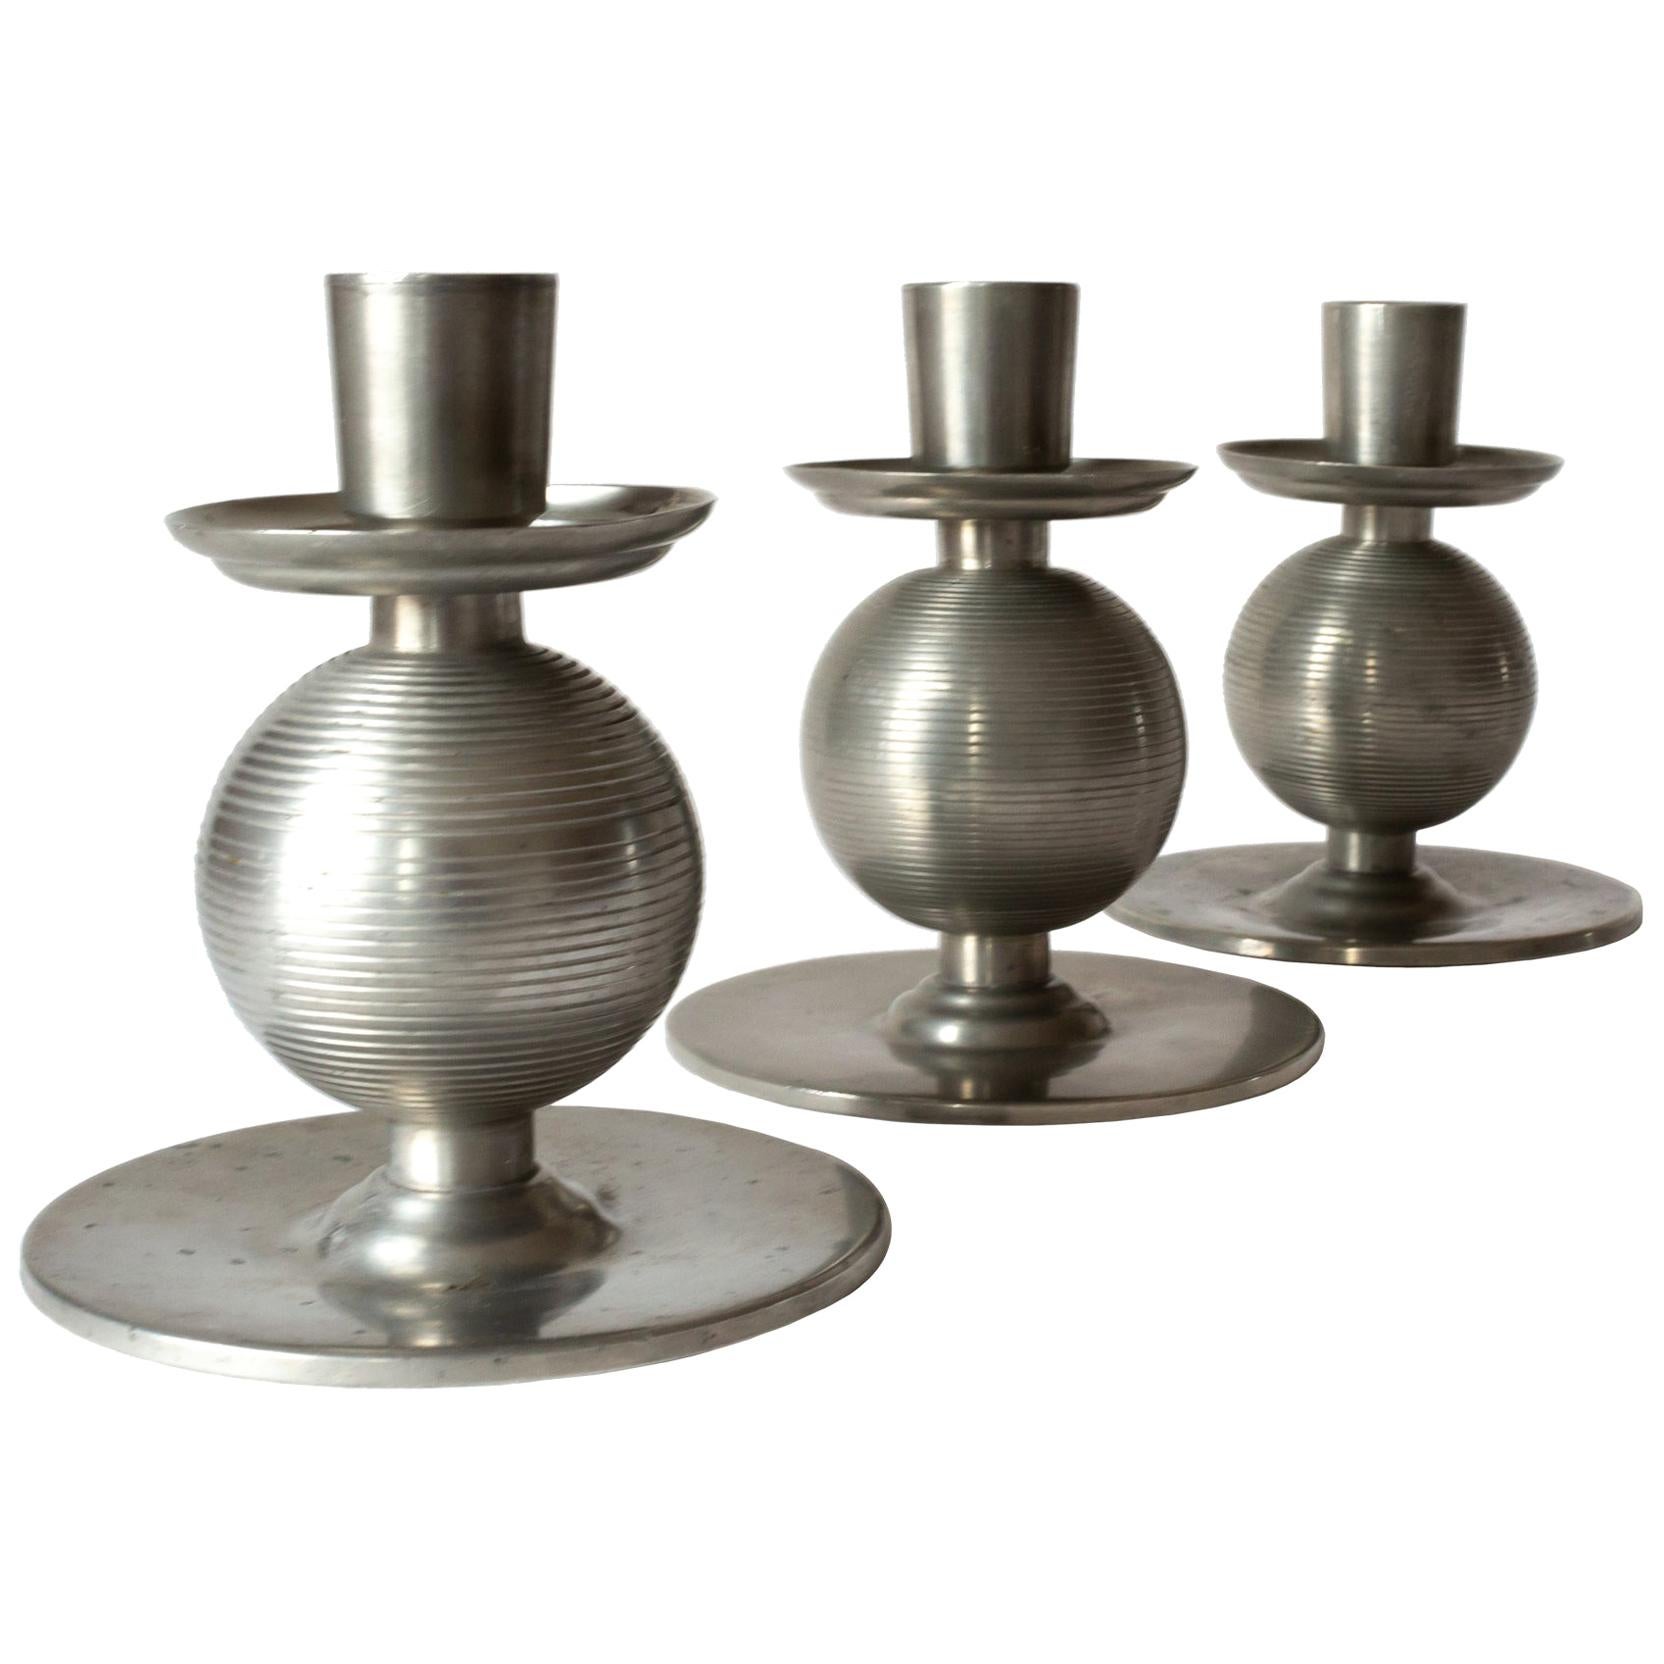 Three Art Deco Pewter Candlesticks Signed by Nils Fougstedt and Made 1937  For Sale at 1stDibs